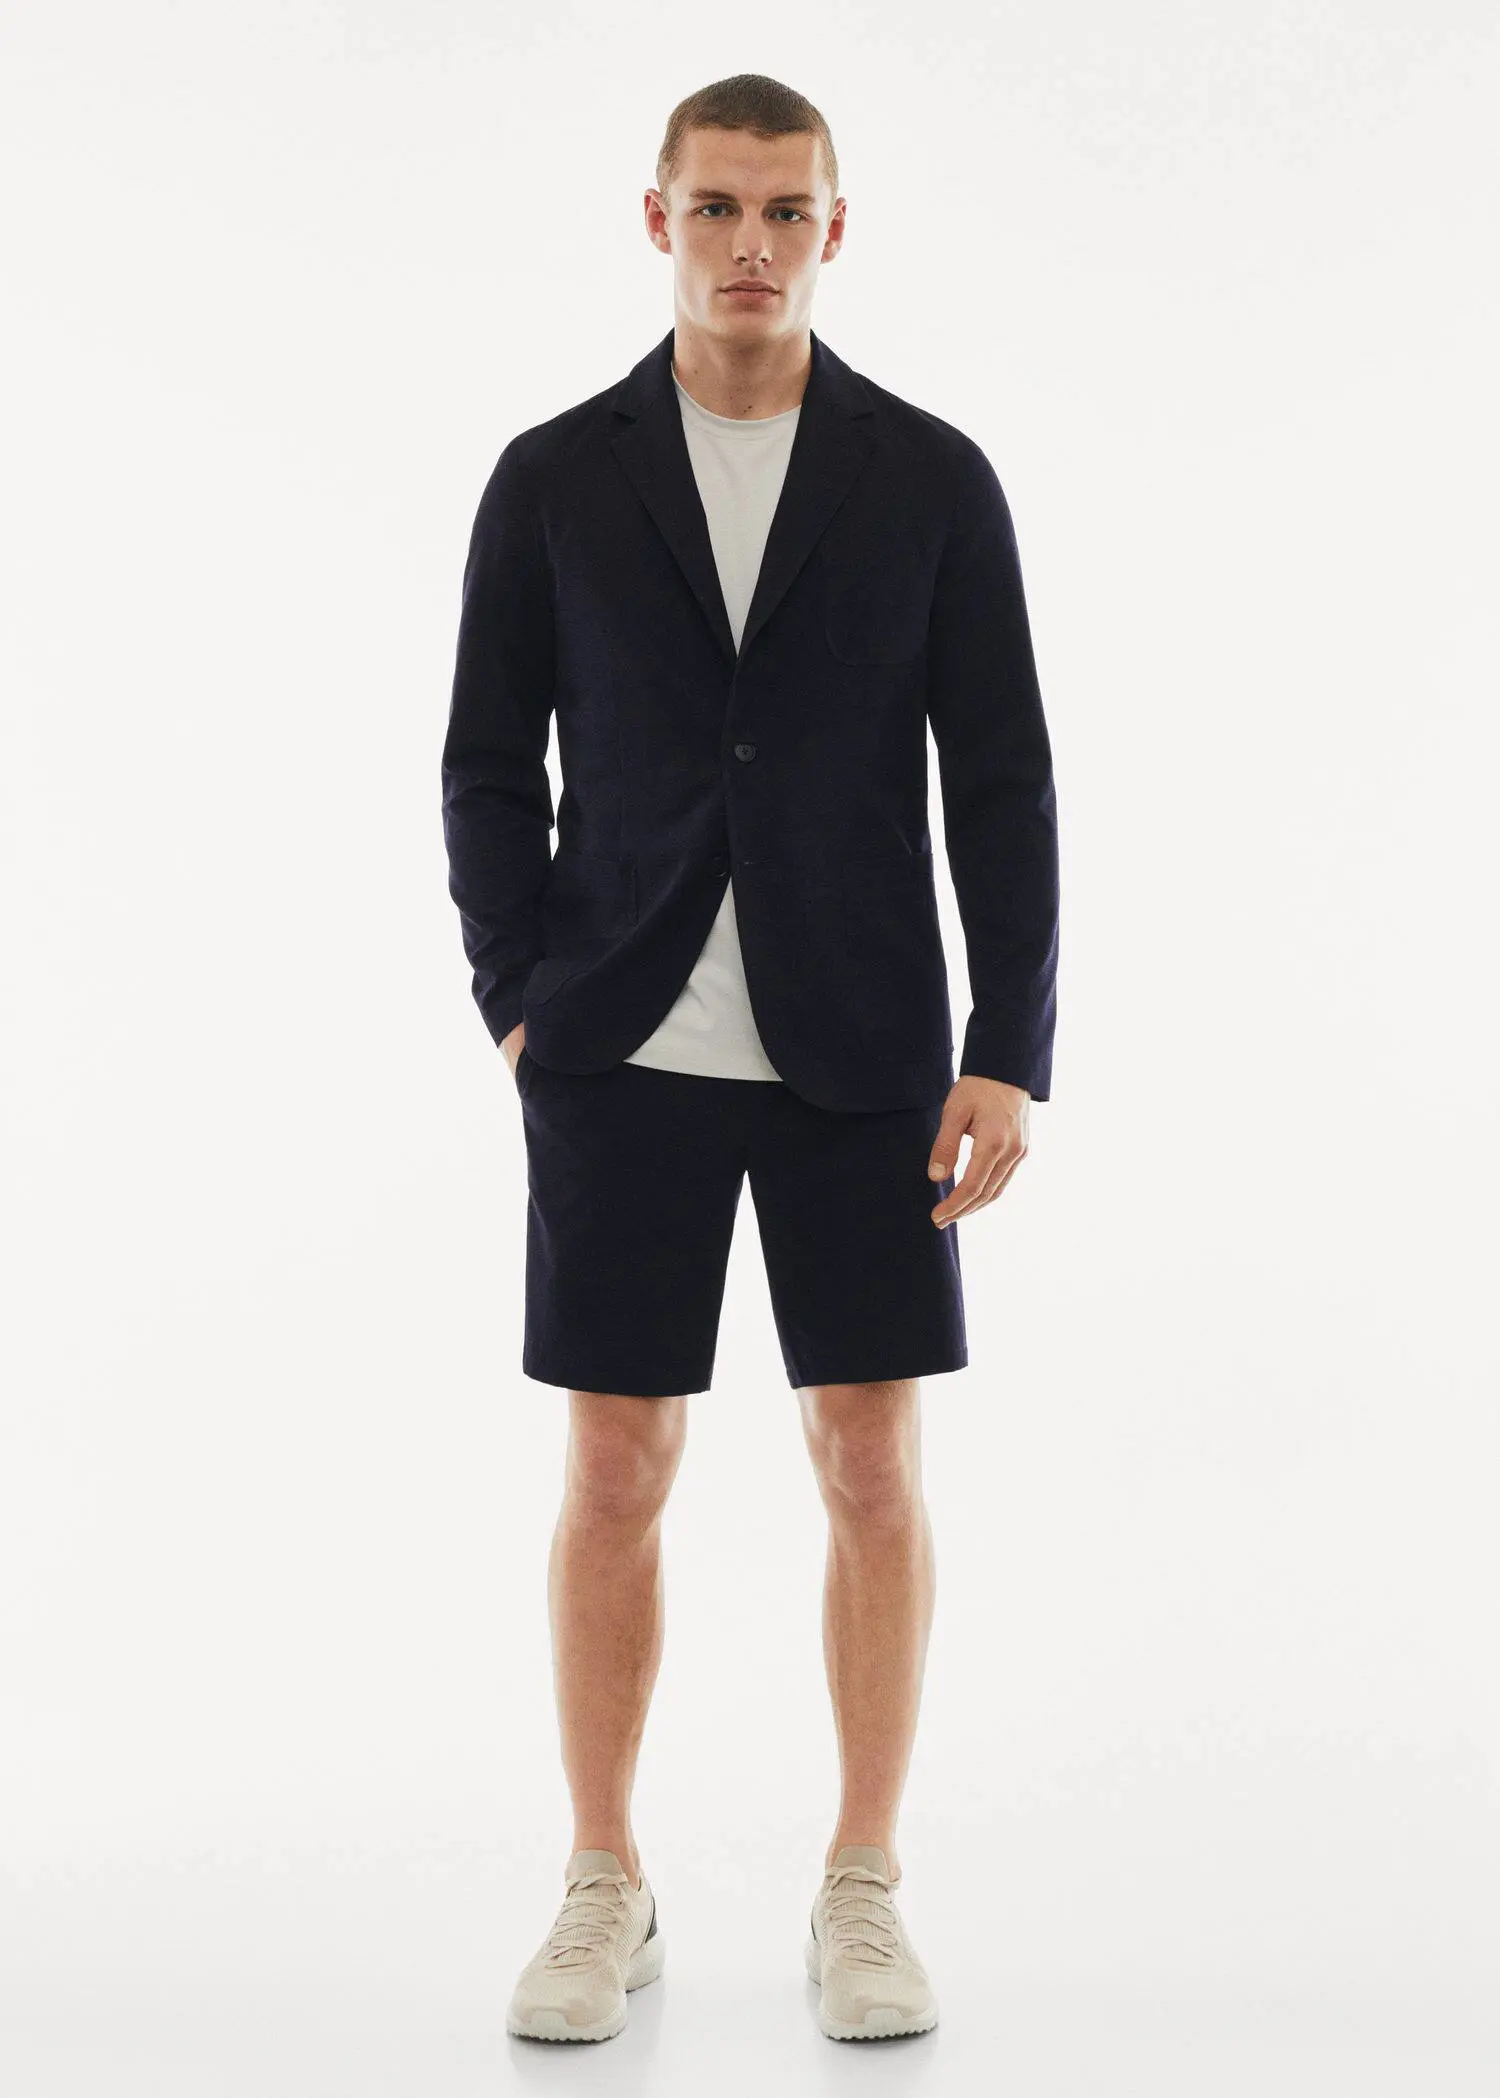 Mango Water-repellent stretch shorts. a man in a black jacket and white shirt. 